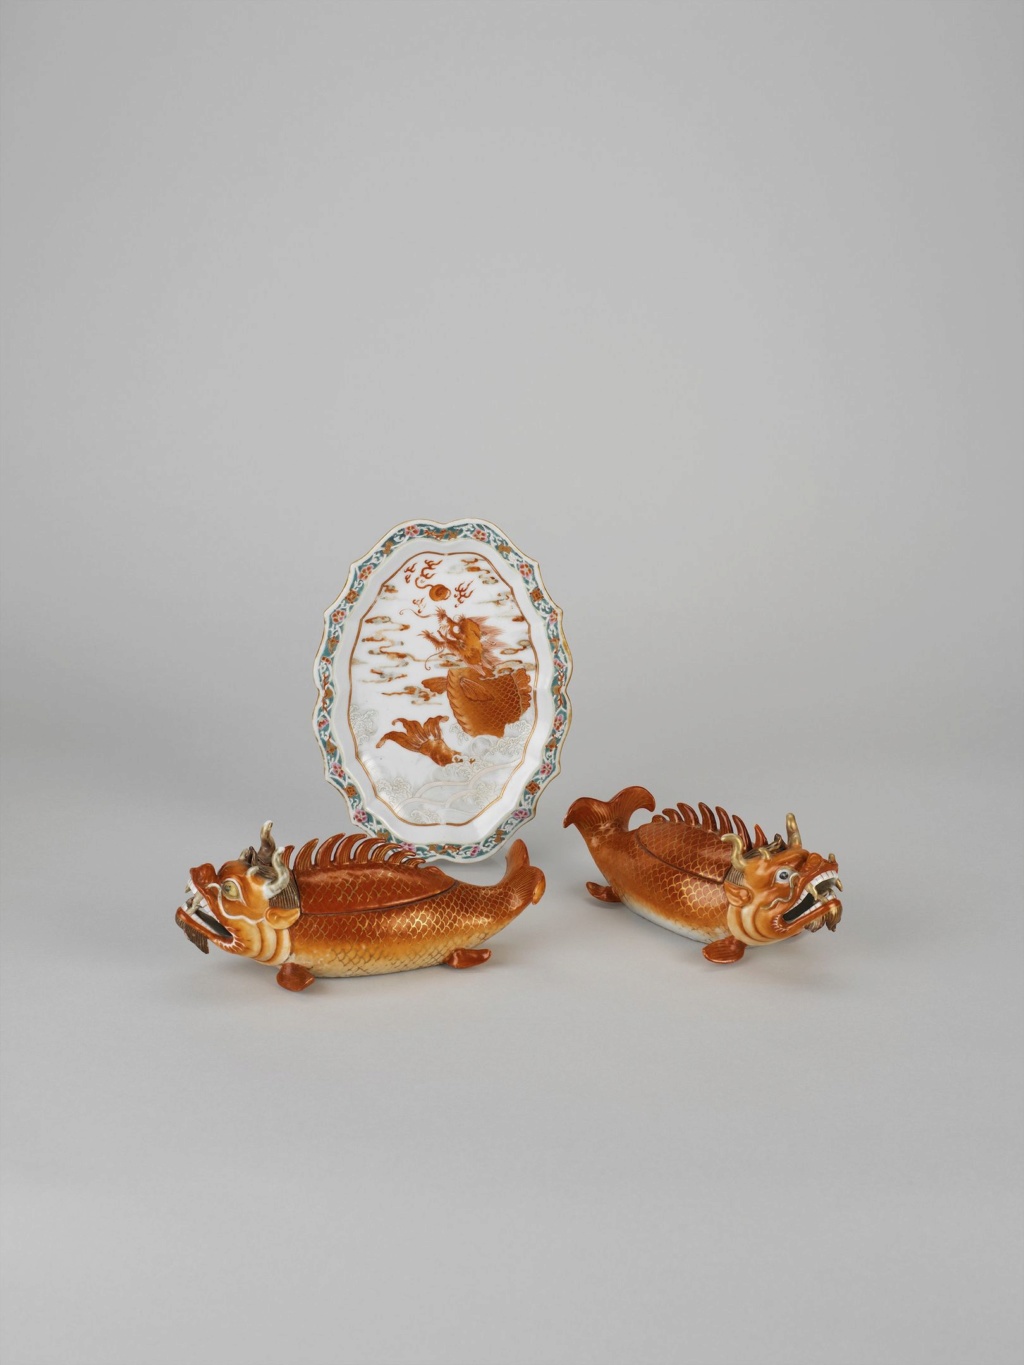 The Porcelain Room - Chinese Export Porcelain Image16